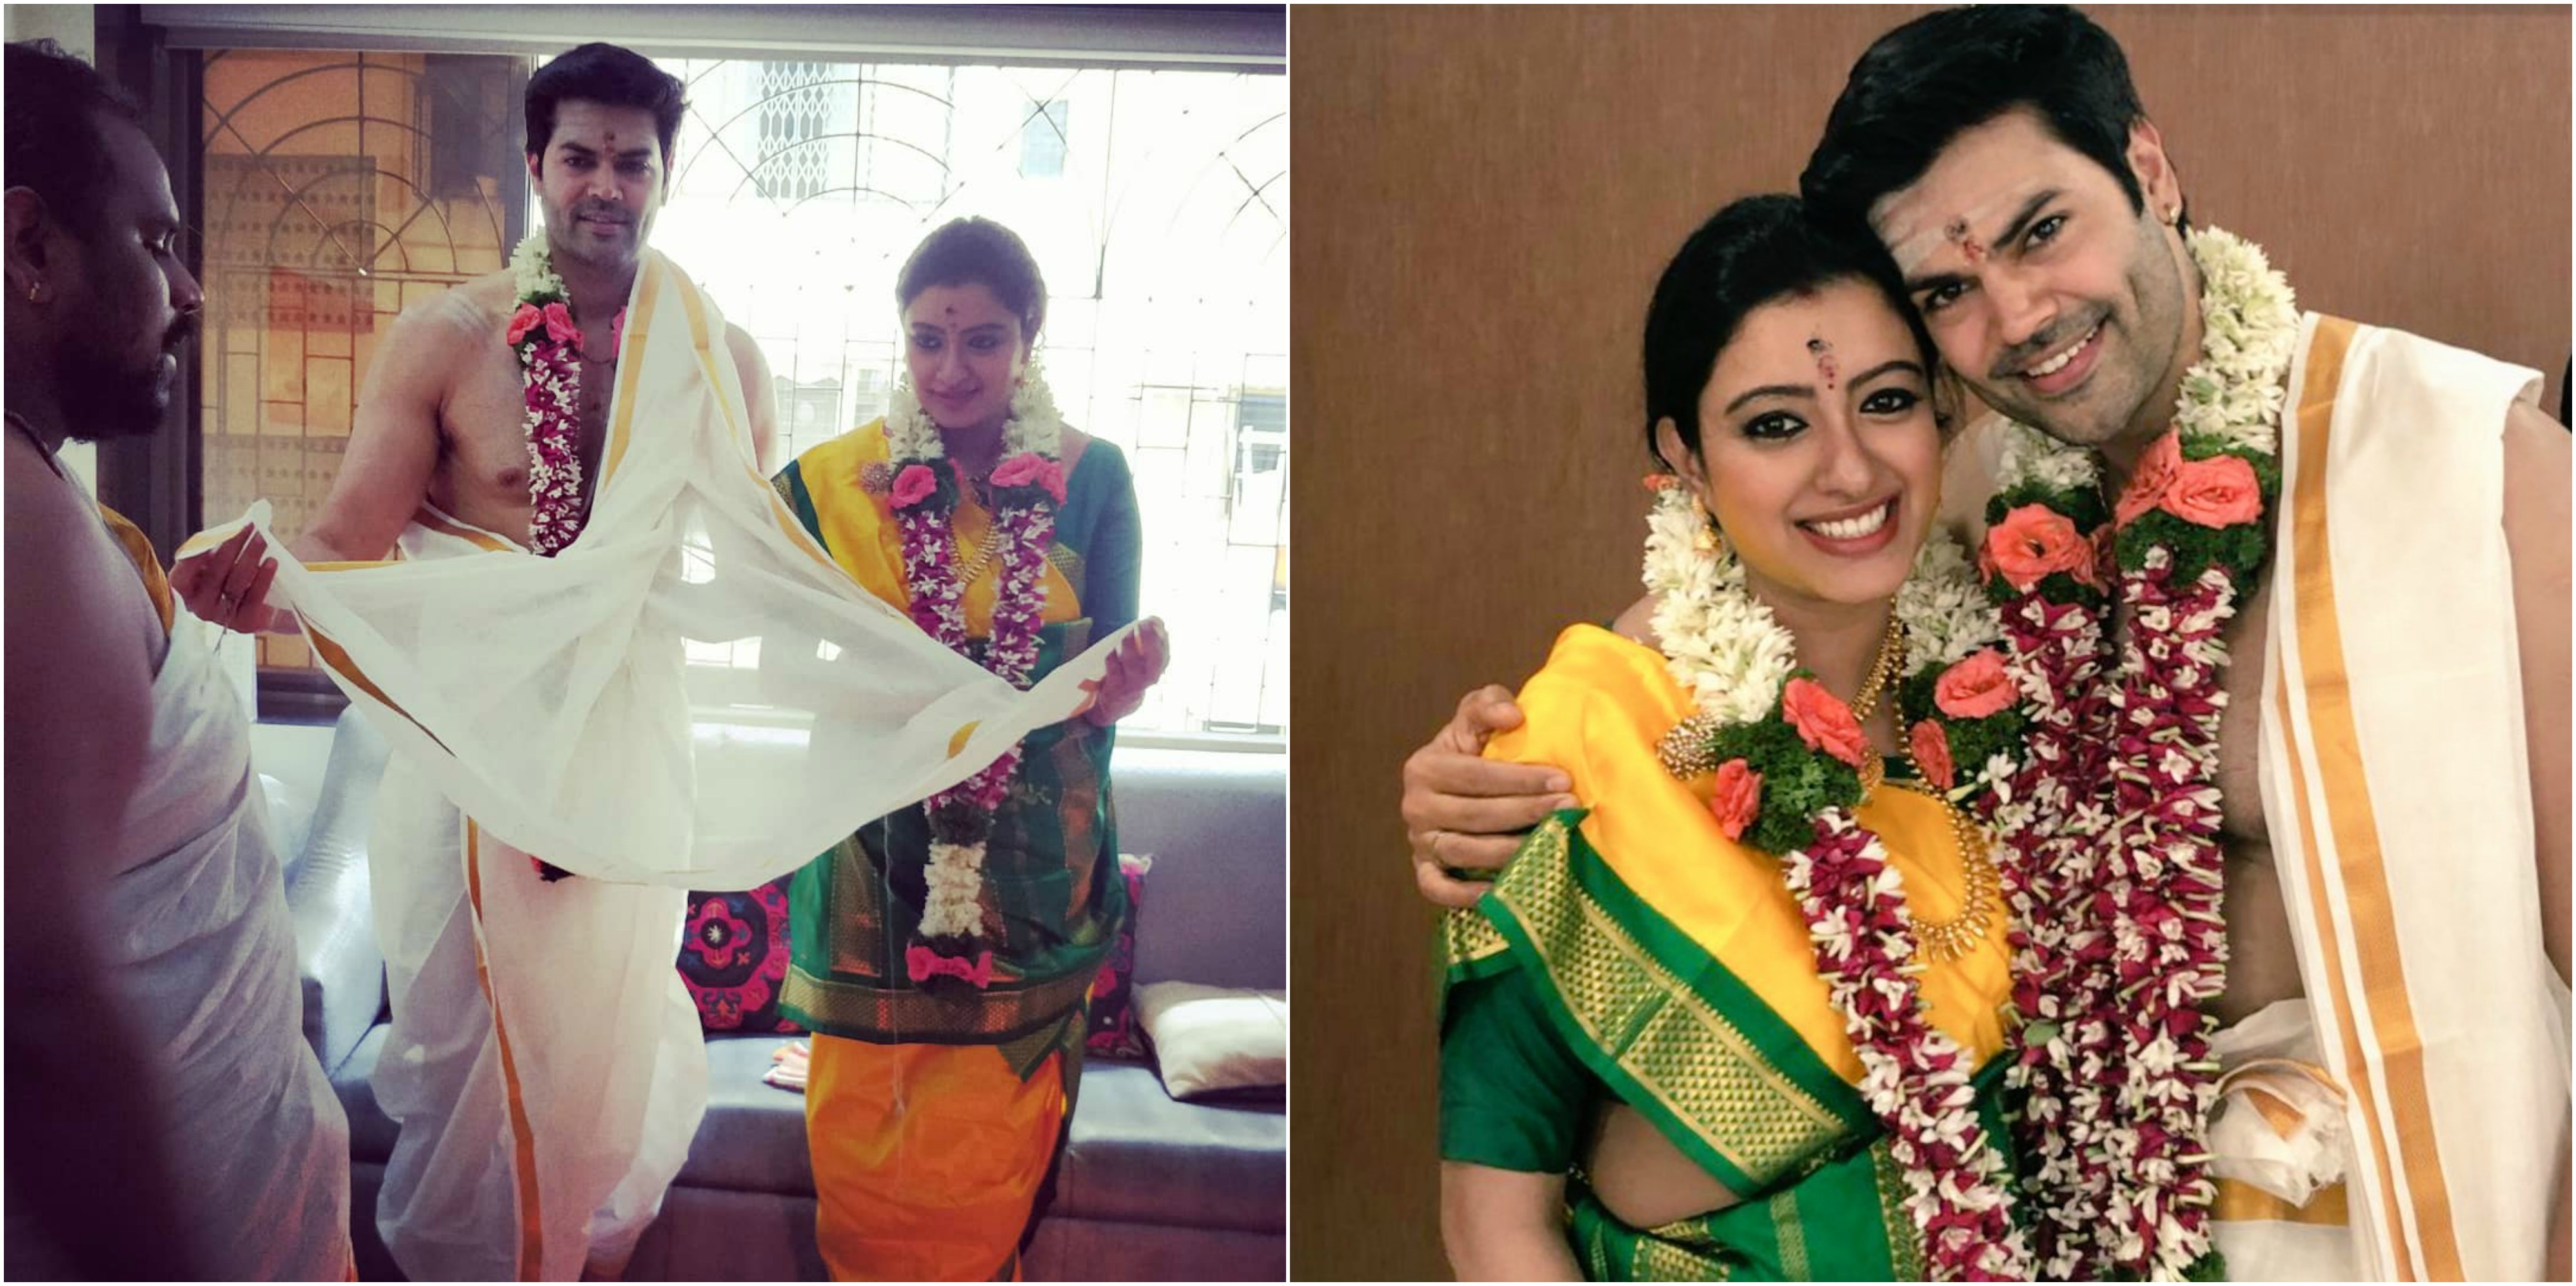 Bigg Boss Fame Ganesh Venkatram To Become A Father Jfw Just For Women See more ideas about baby shower, baby shower decorations, baby boy shower. bigg boss fame ganesh venkatram to